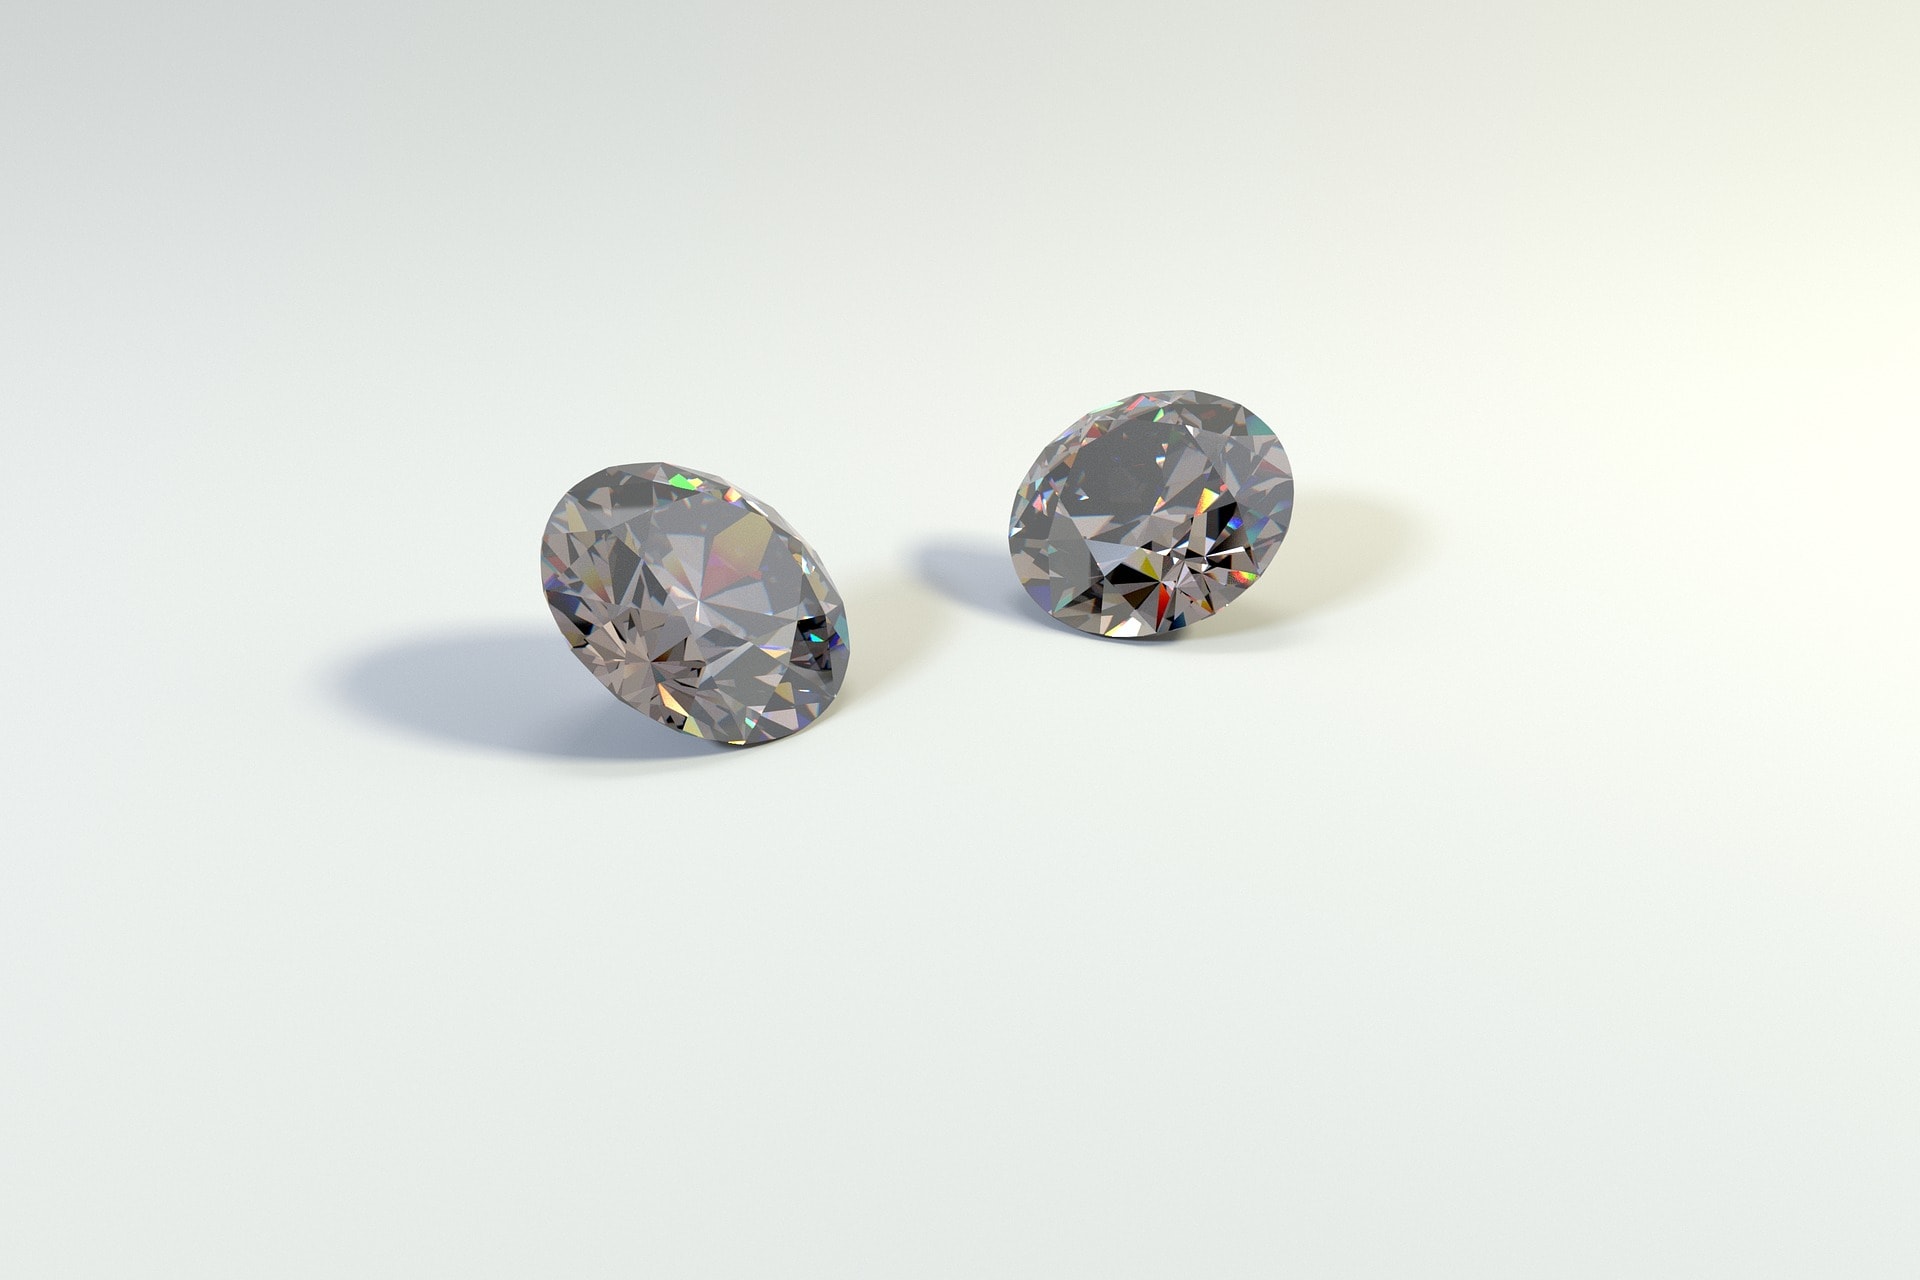 Round shape diamonds scattered on table